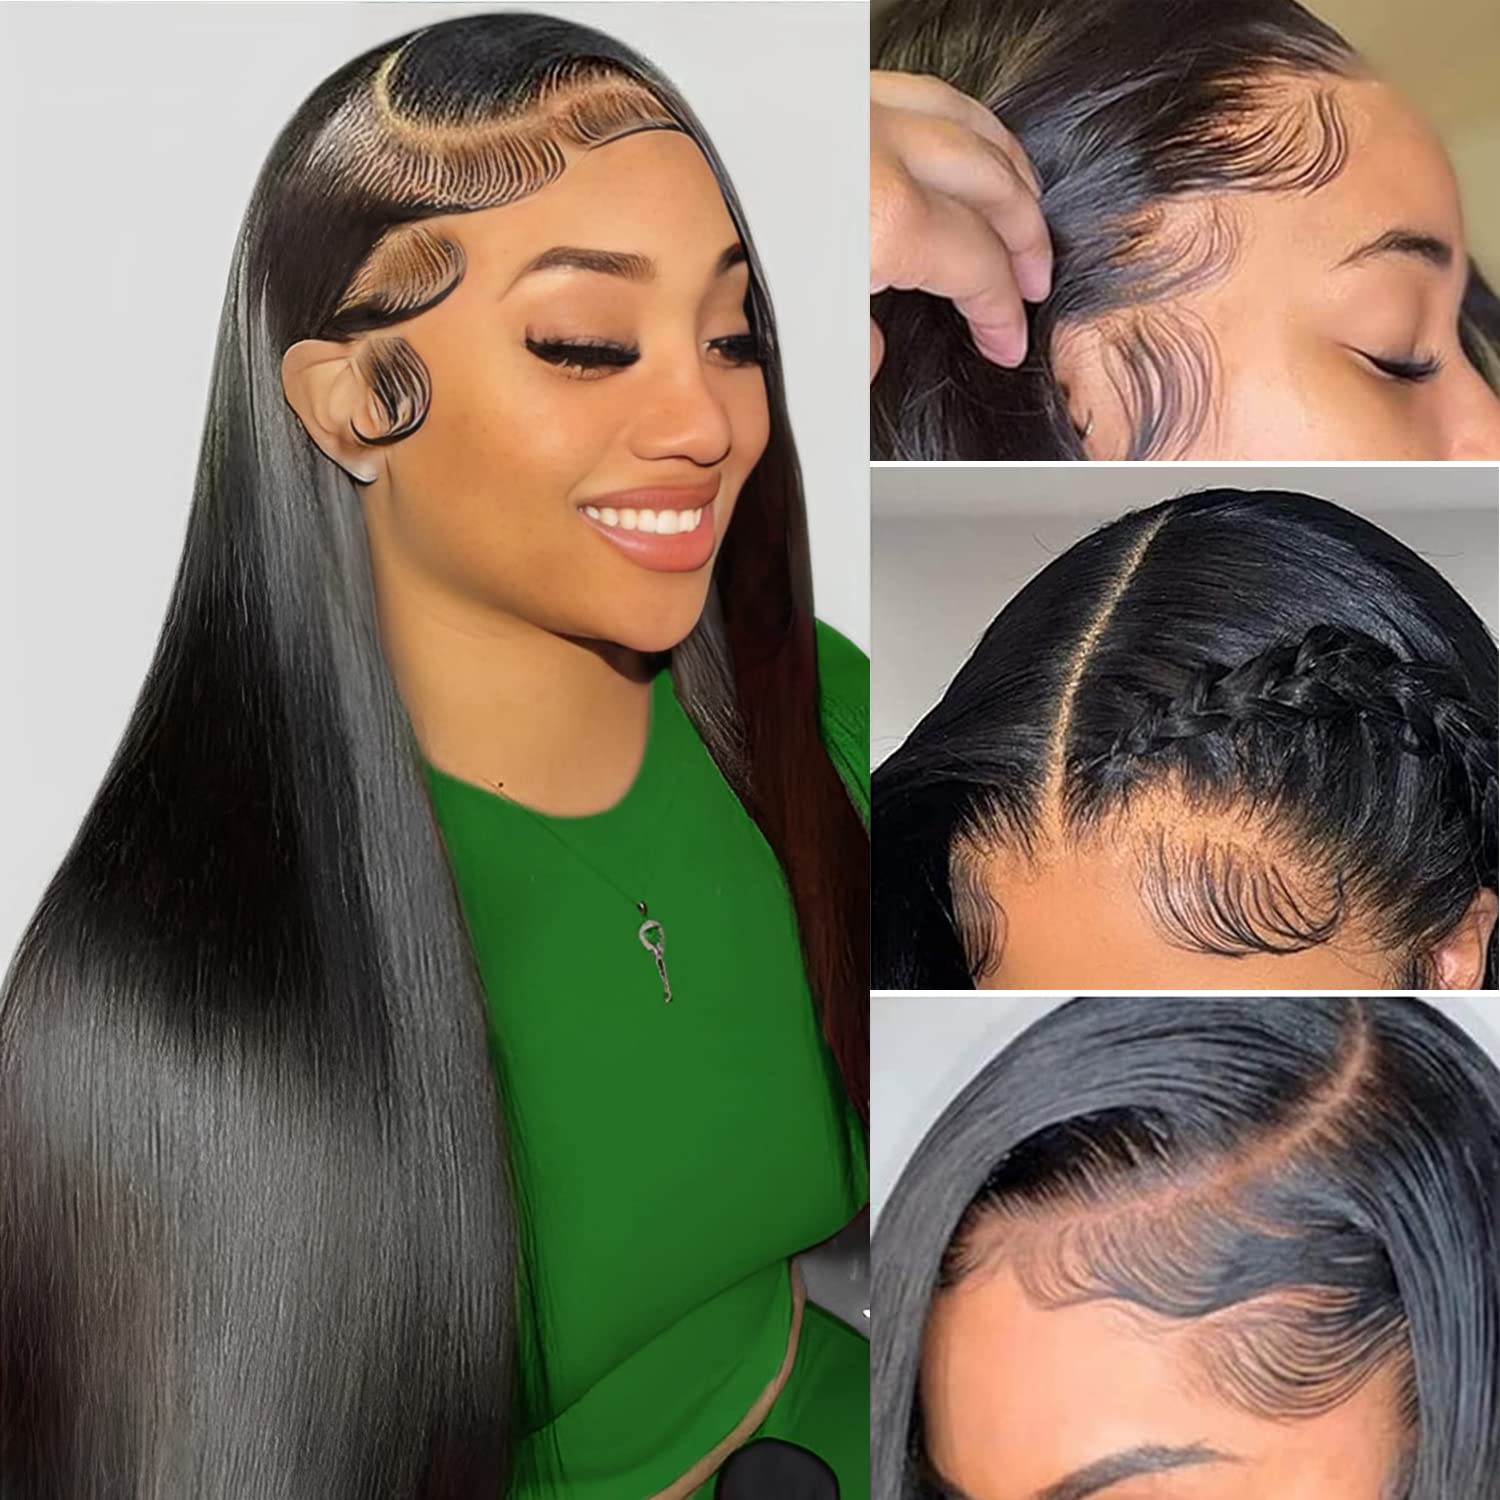 How to cut lace fronts, frontals and lace front wigs - PhenomenalhairCare